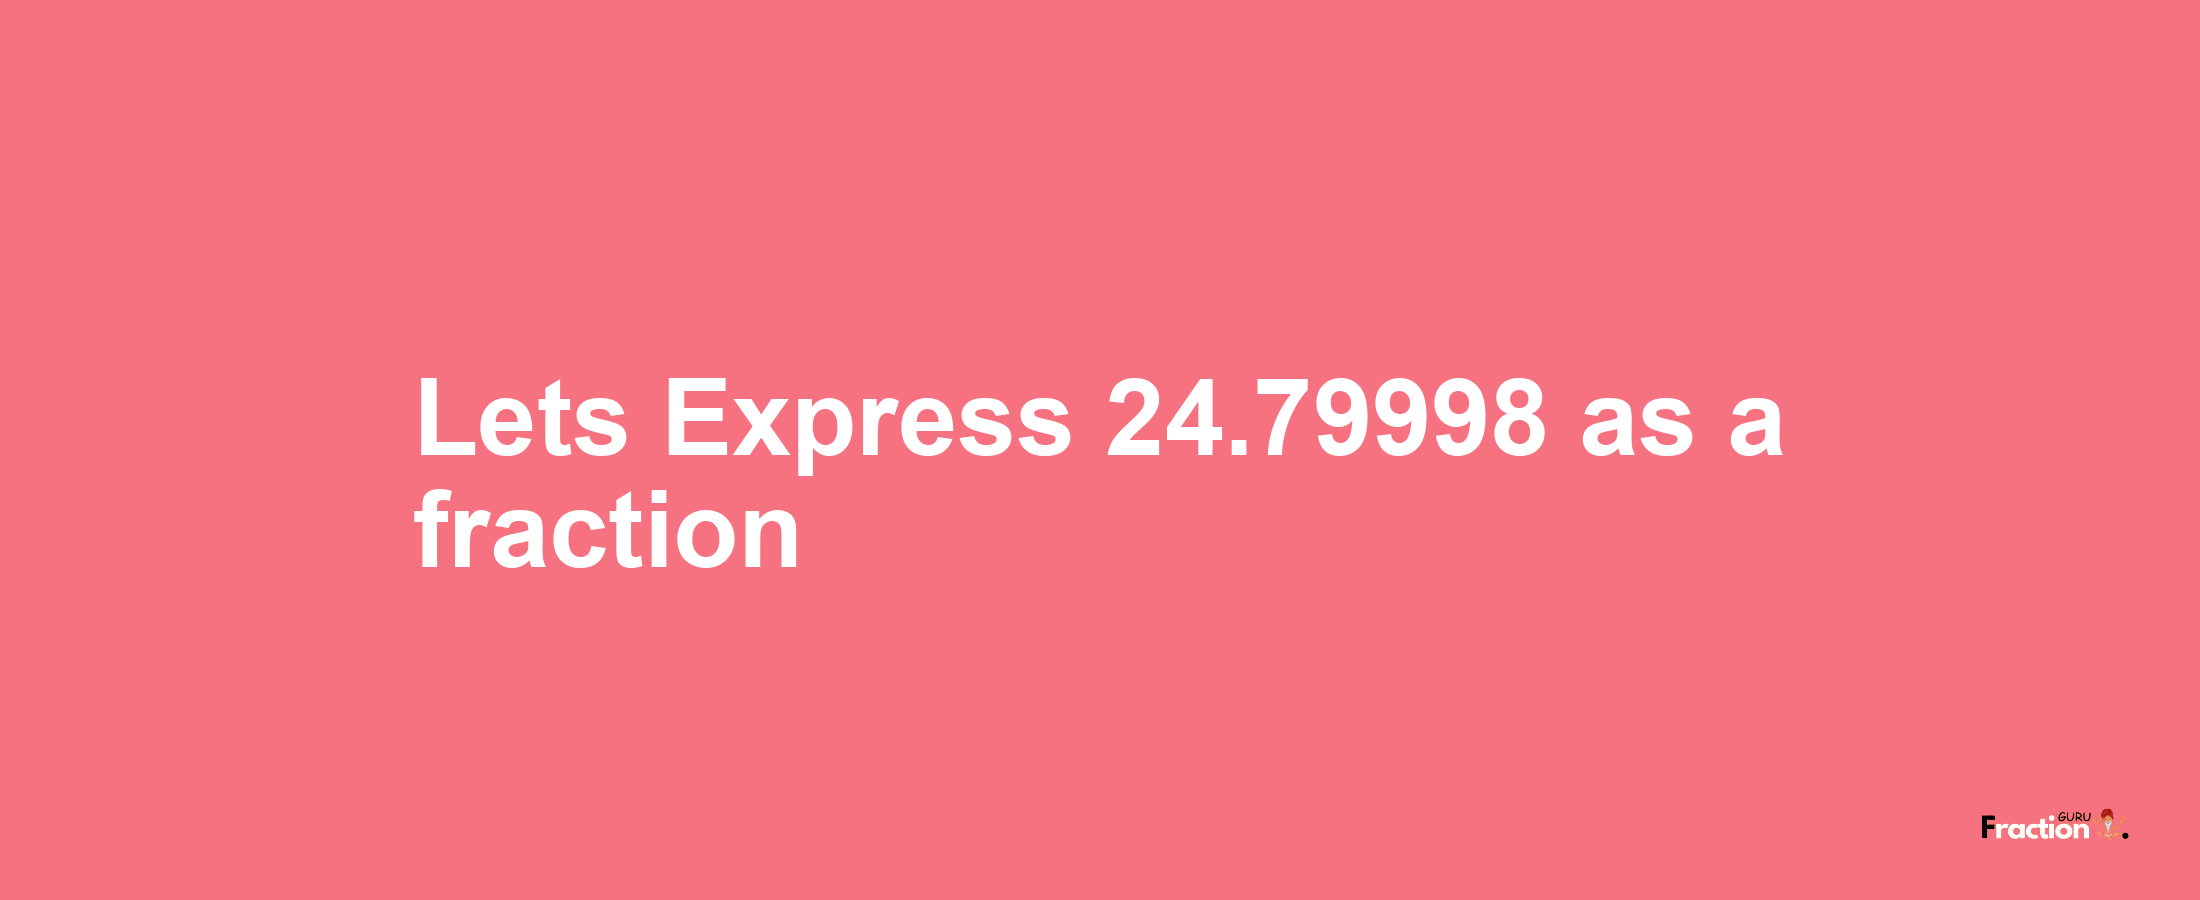 Lets Express 24.79998 as afraction